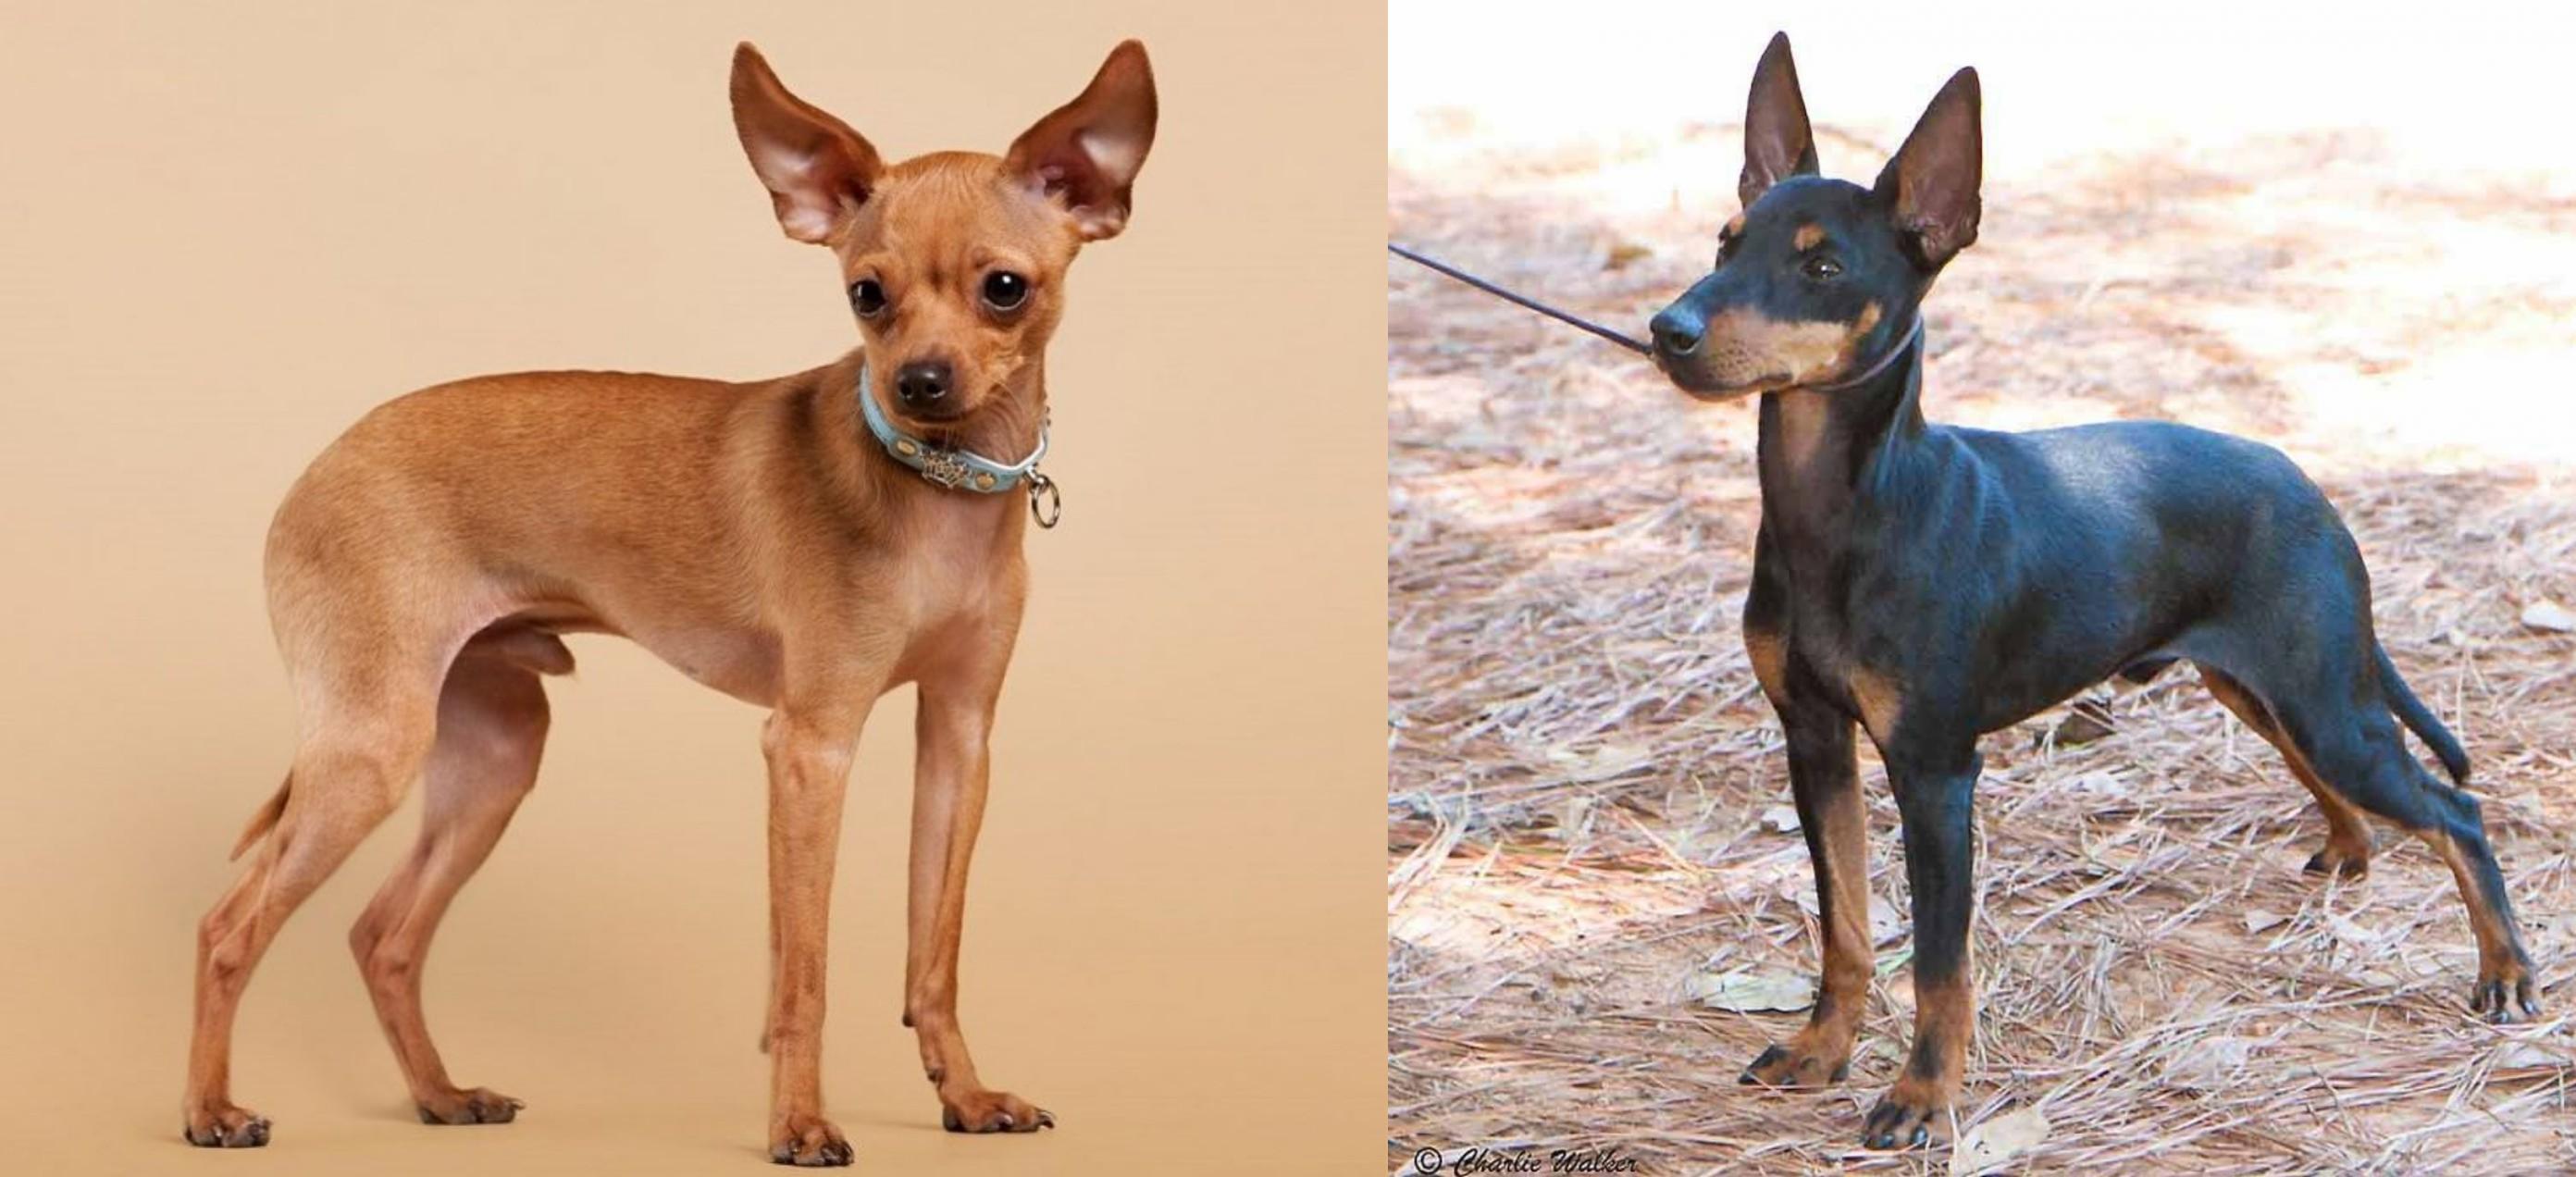 Russian Toy Terrier Vs English Toy Terrier Black Tan Breed Comparison